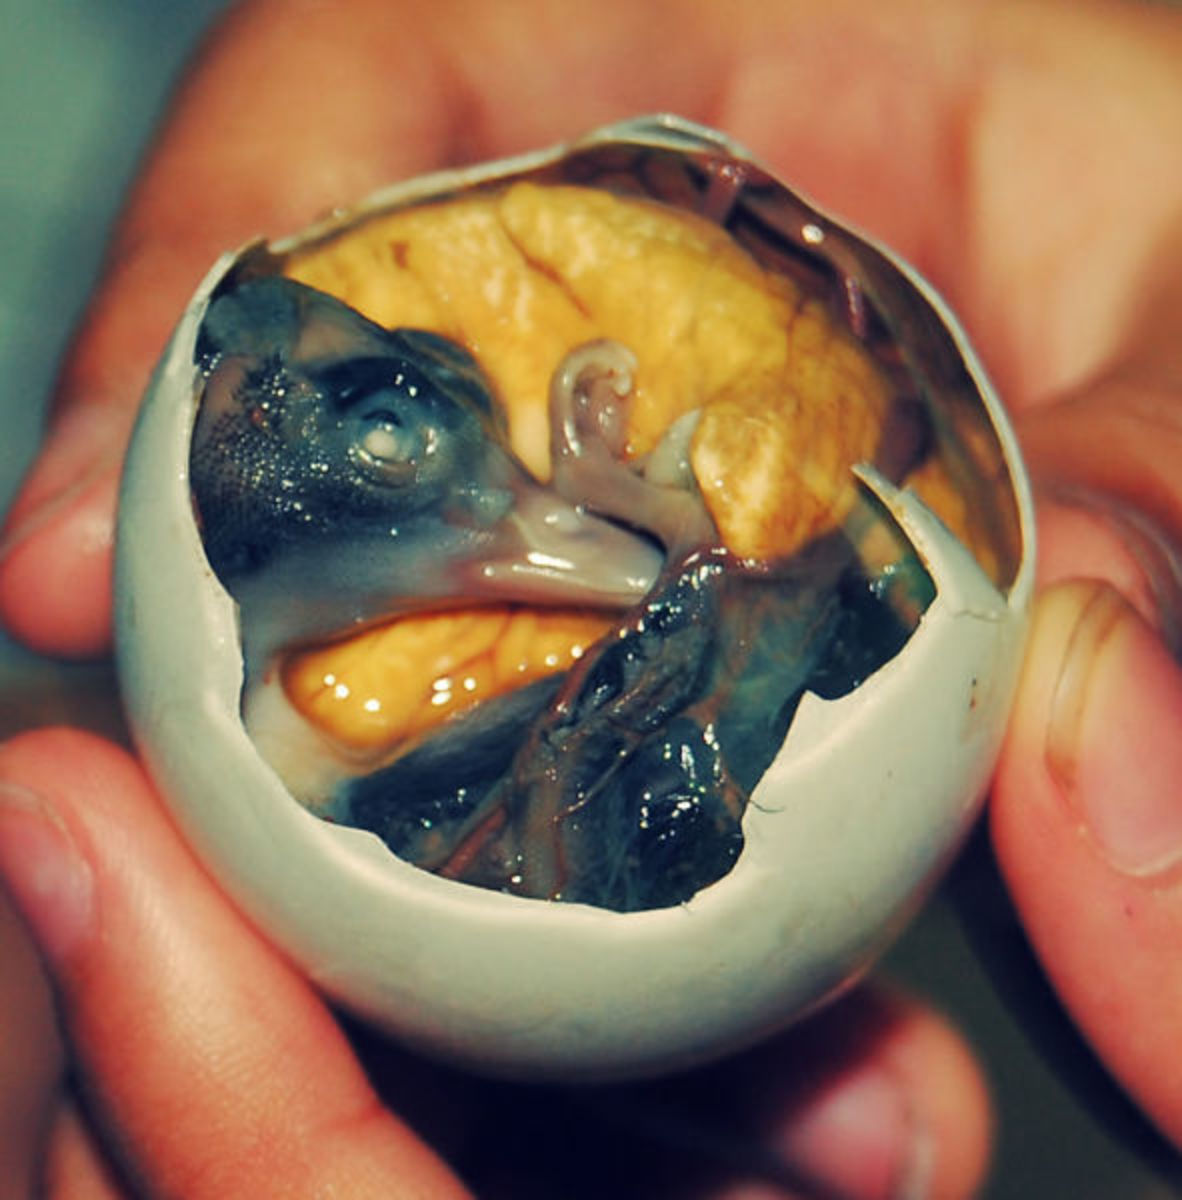 Balut, Phillippines -alut is a “snack” consisting in a half-fertilized duck or chicken egg, served with a little salt after being boiled. One can find it all over the streets and markets of Philippines, Vietnam, Laos and Cambodia and it is as popular